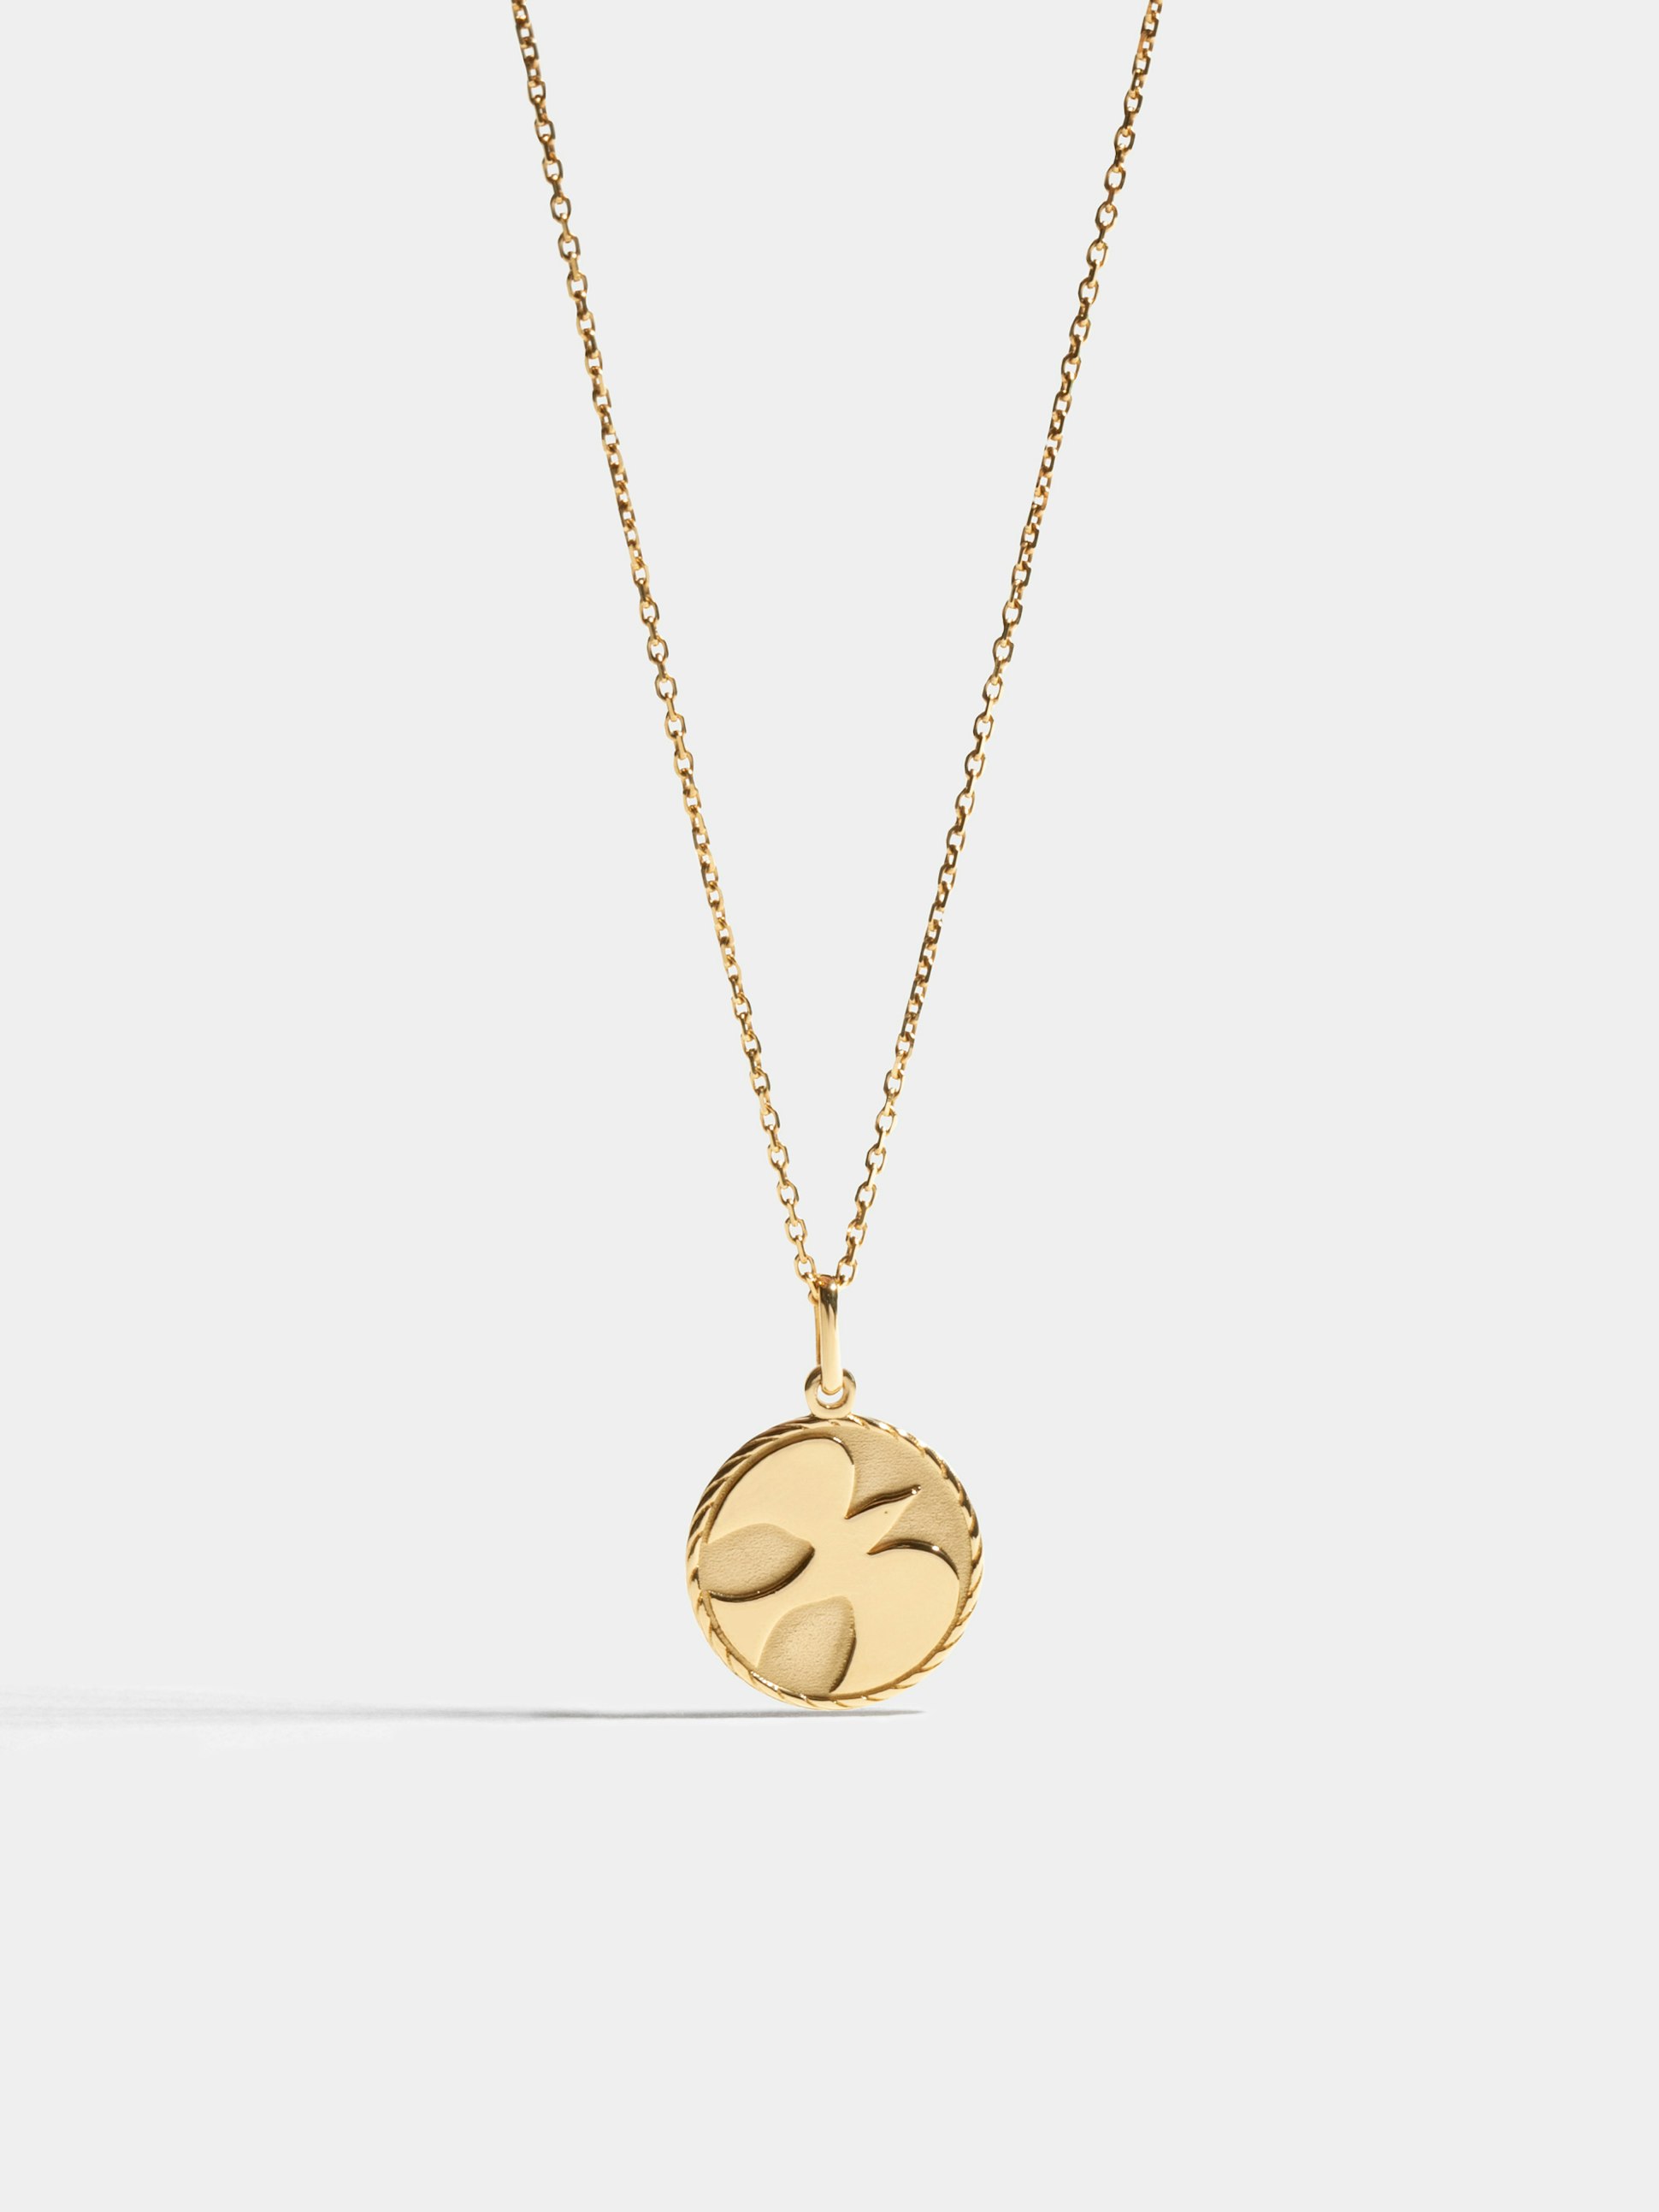 Dove medal in 18k Fairmined ethical yellow gold, on a 45cm chain.